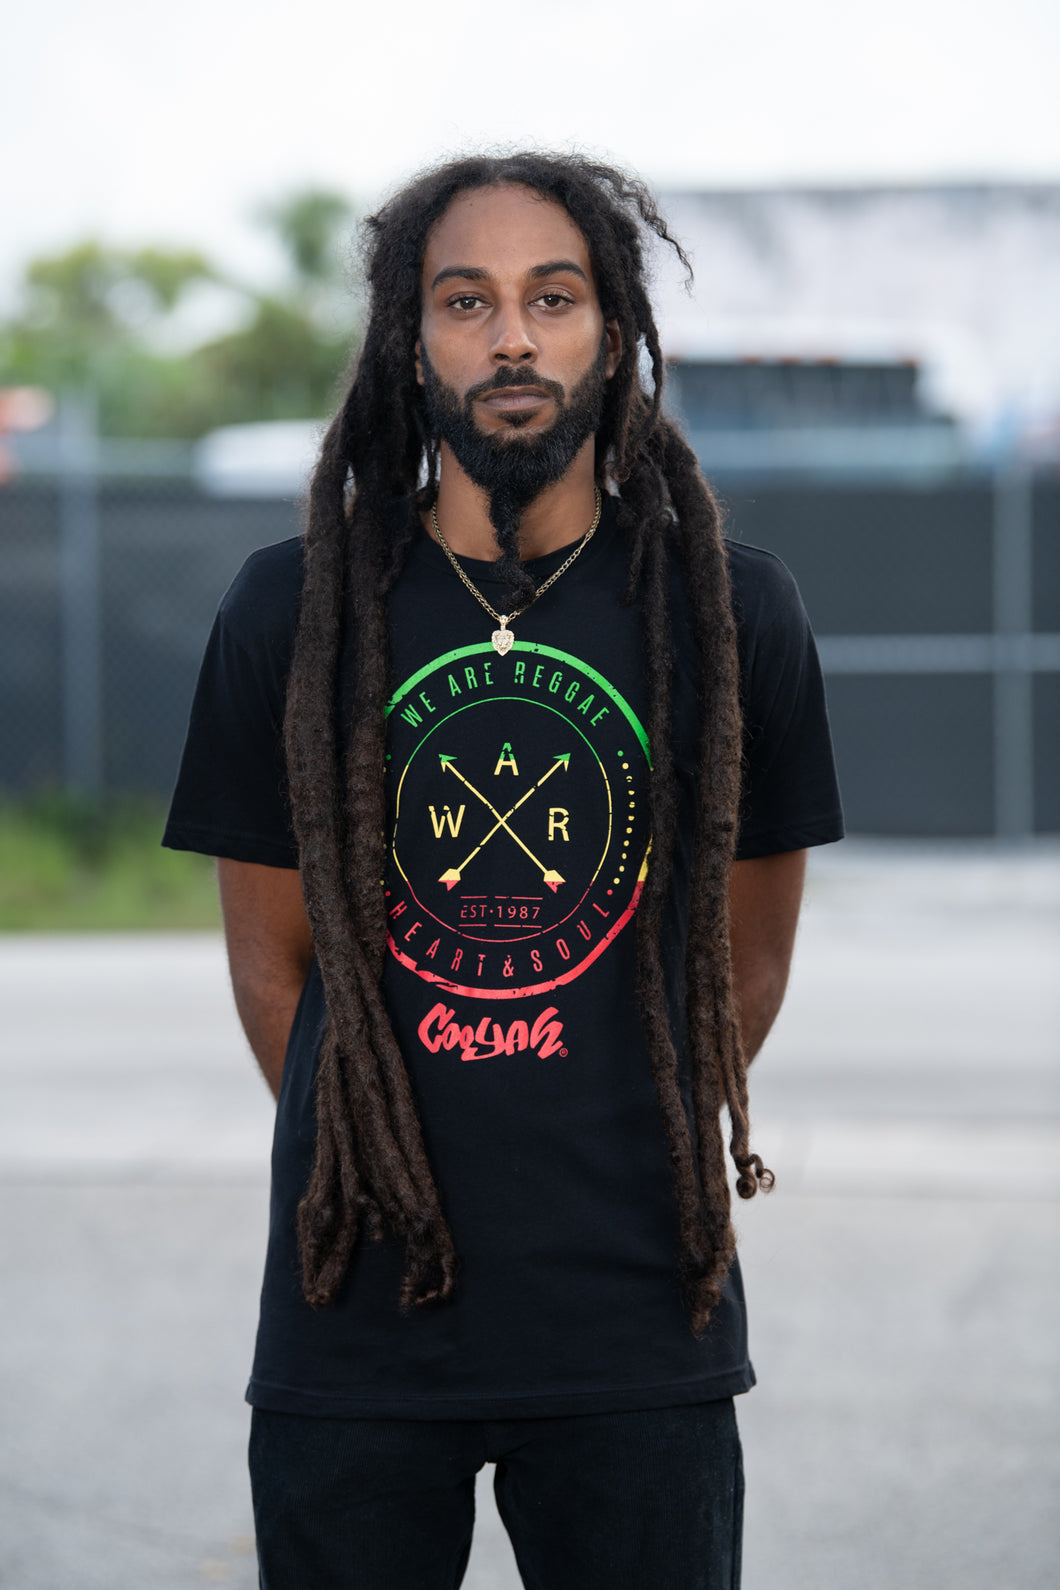 We Are Reggae men's graphic tee by Cooyah Jamaica.  Short sleeve, crew neck, soft ringspun cotton.  Black shirt with rasta color screen print.  Jamaican streetwear clothing brand.